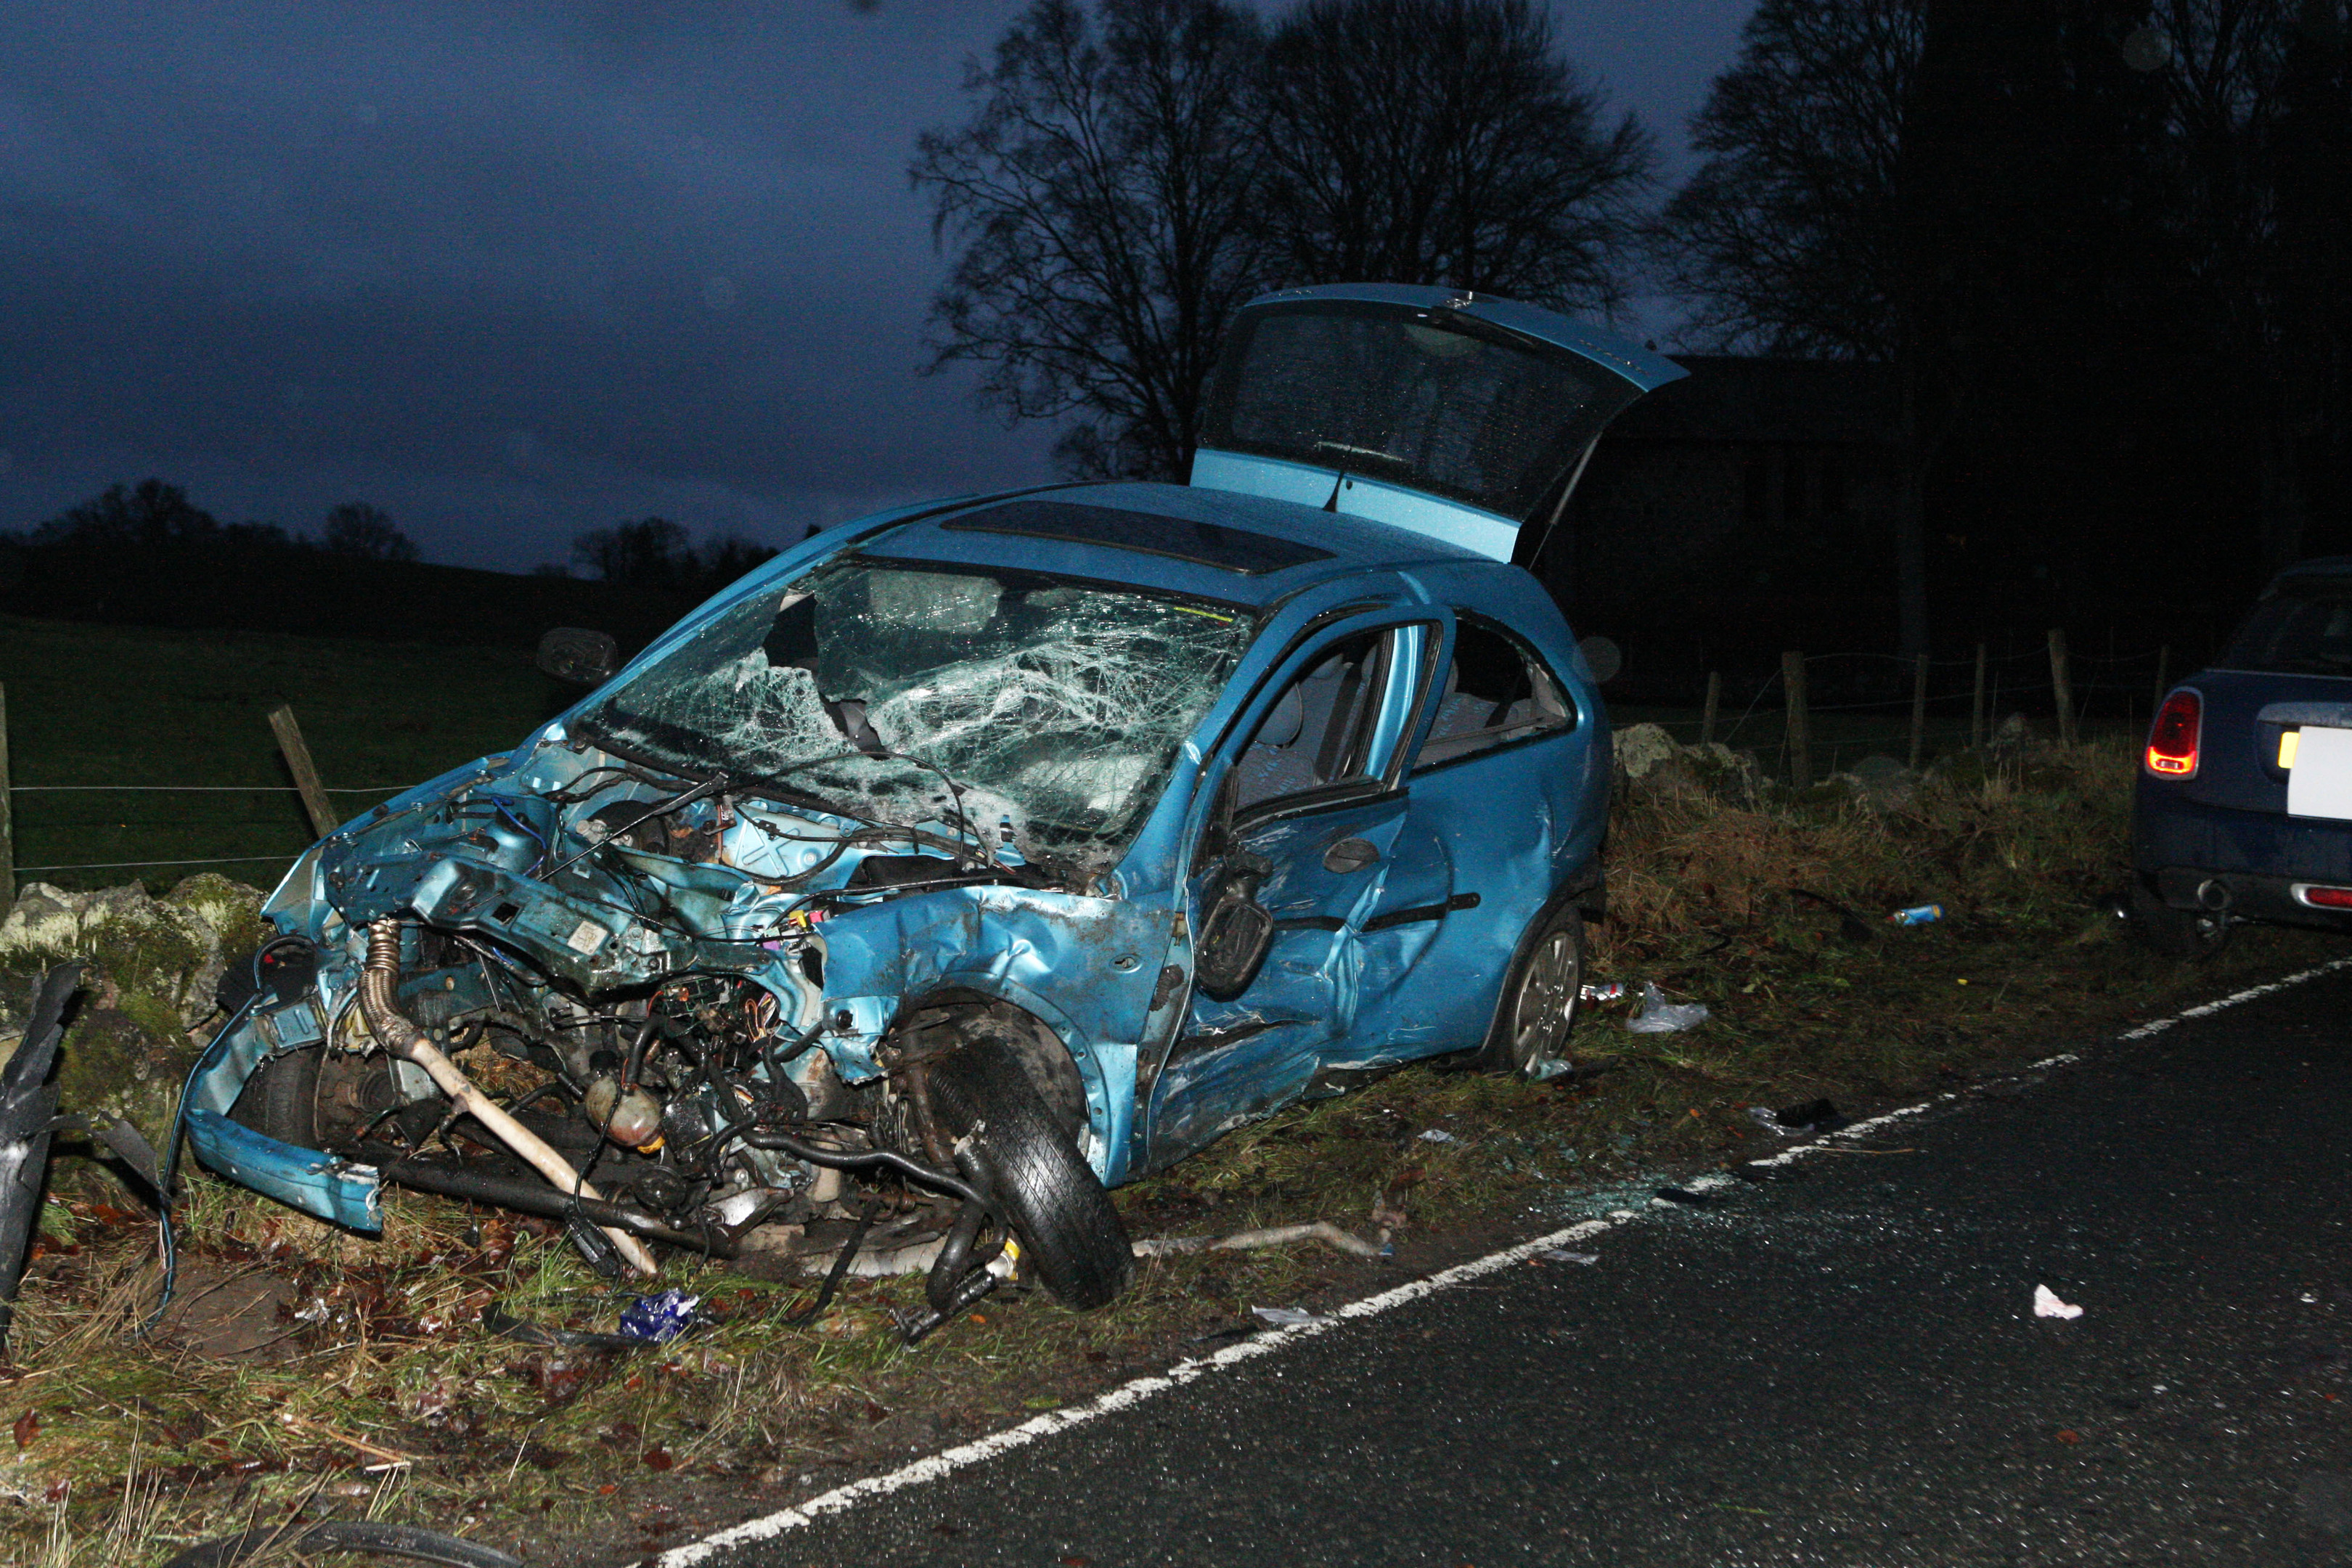 The crash on the A862 road involved three vehicles